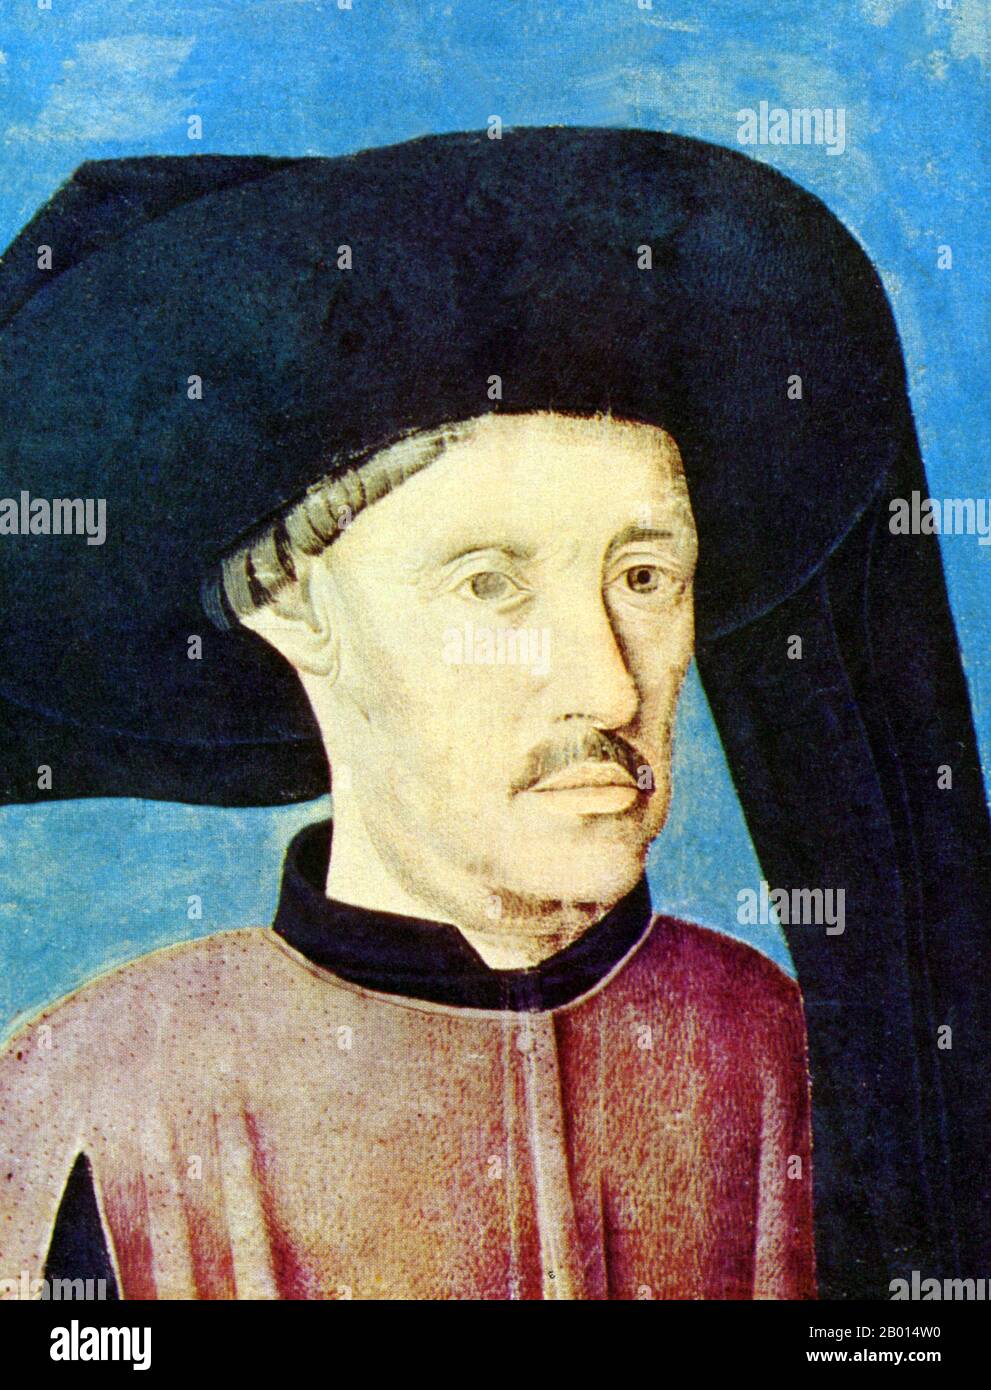 Portugal: Henry the Navigator (4 March 1394 - 13 November 1460), Portuguese prince and early patron of exploration in Africa. Portrait from frontispiece of 'Cronicas dos Feitos de Guine', c. 1453.  Dom Henrique of Portugal, Duke of Viseu, more commonly known as Prince Henry the Navigator, was the third child of King John I of Portugal and an important figure in the early days of the Portuguese Empire. He sponsored much of the early European exploration and maritime trade with other continents, particularly Africa. He is regarded by many as the primary initiator of the 'Age of Discovery'. Stock Photo